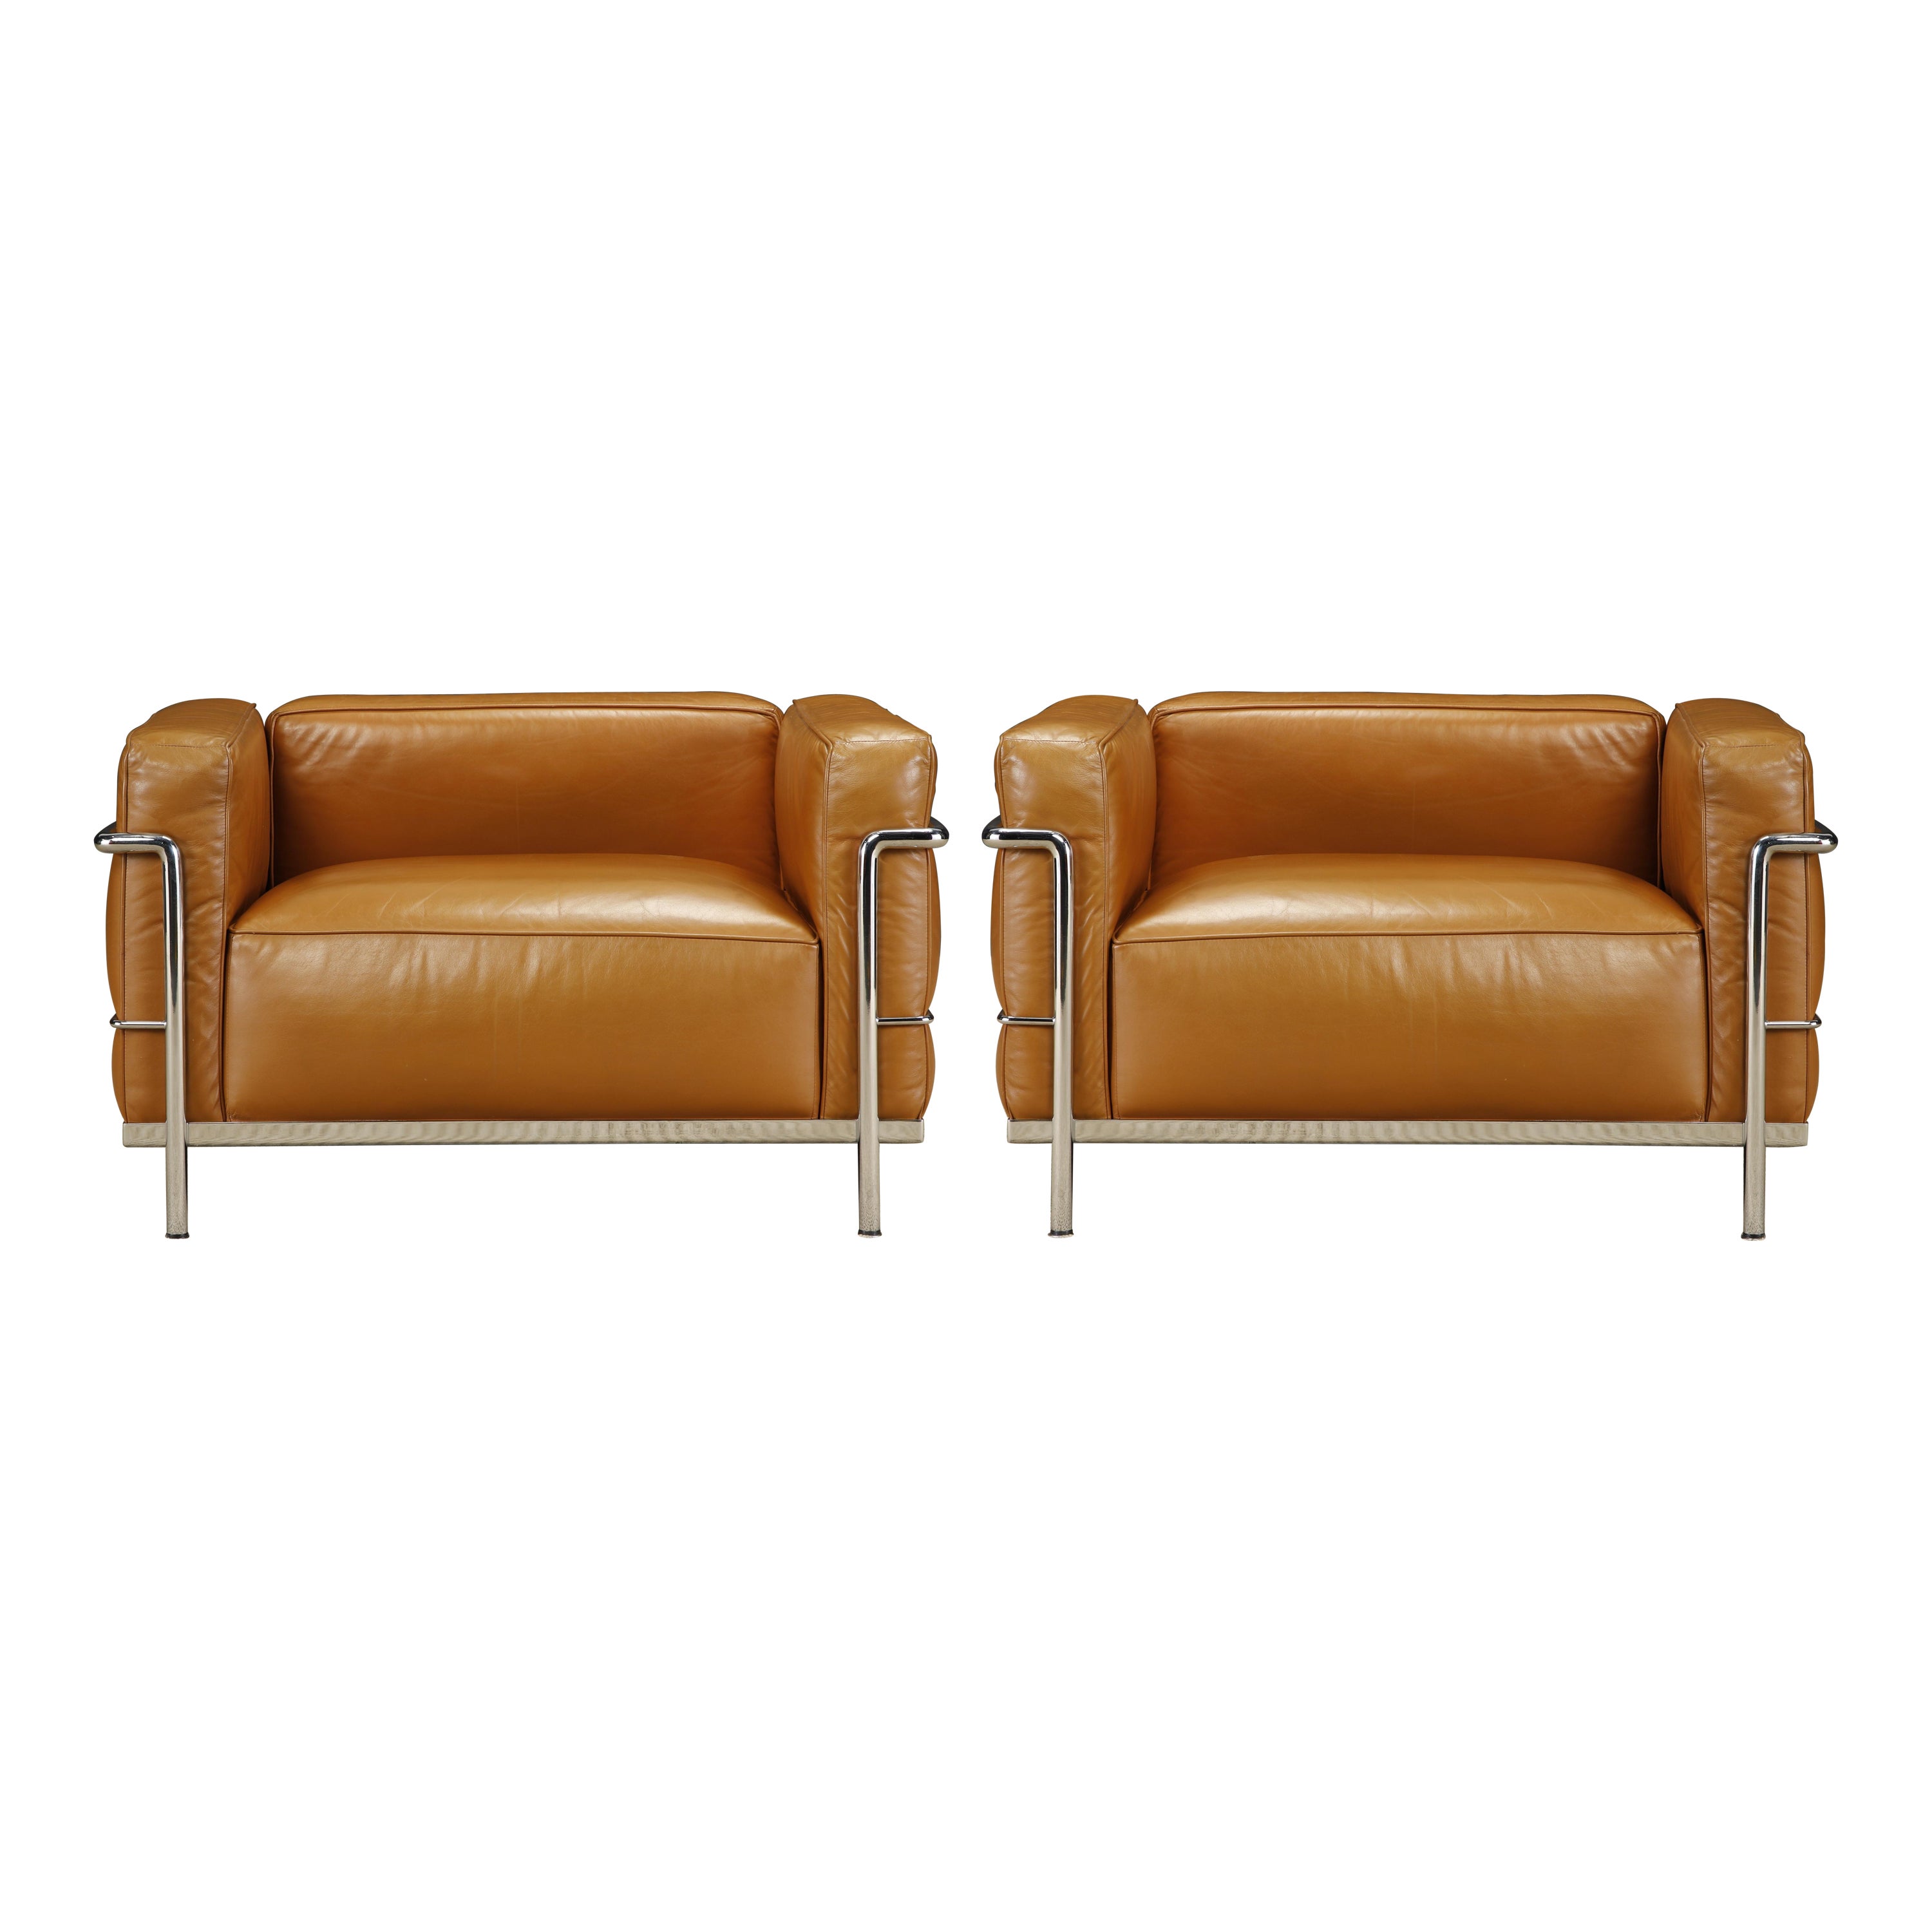 Early 'LC3' Club Chairs in Cognac Leather by Le Corbusier for Cassina, Signed